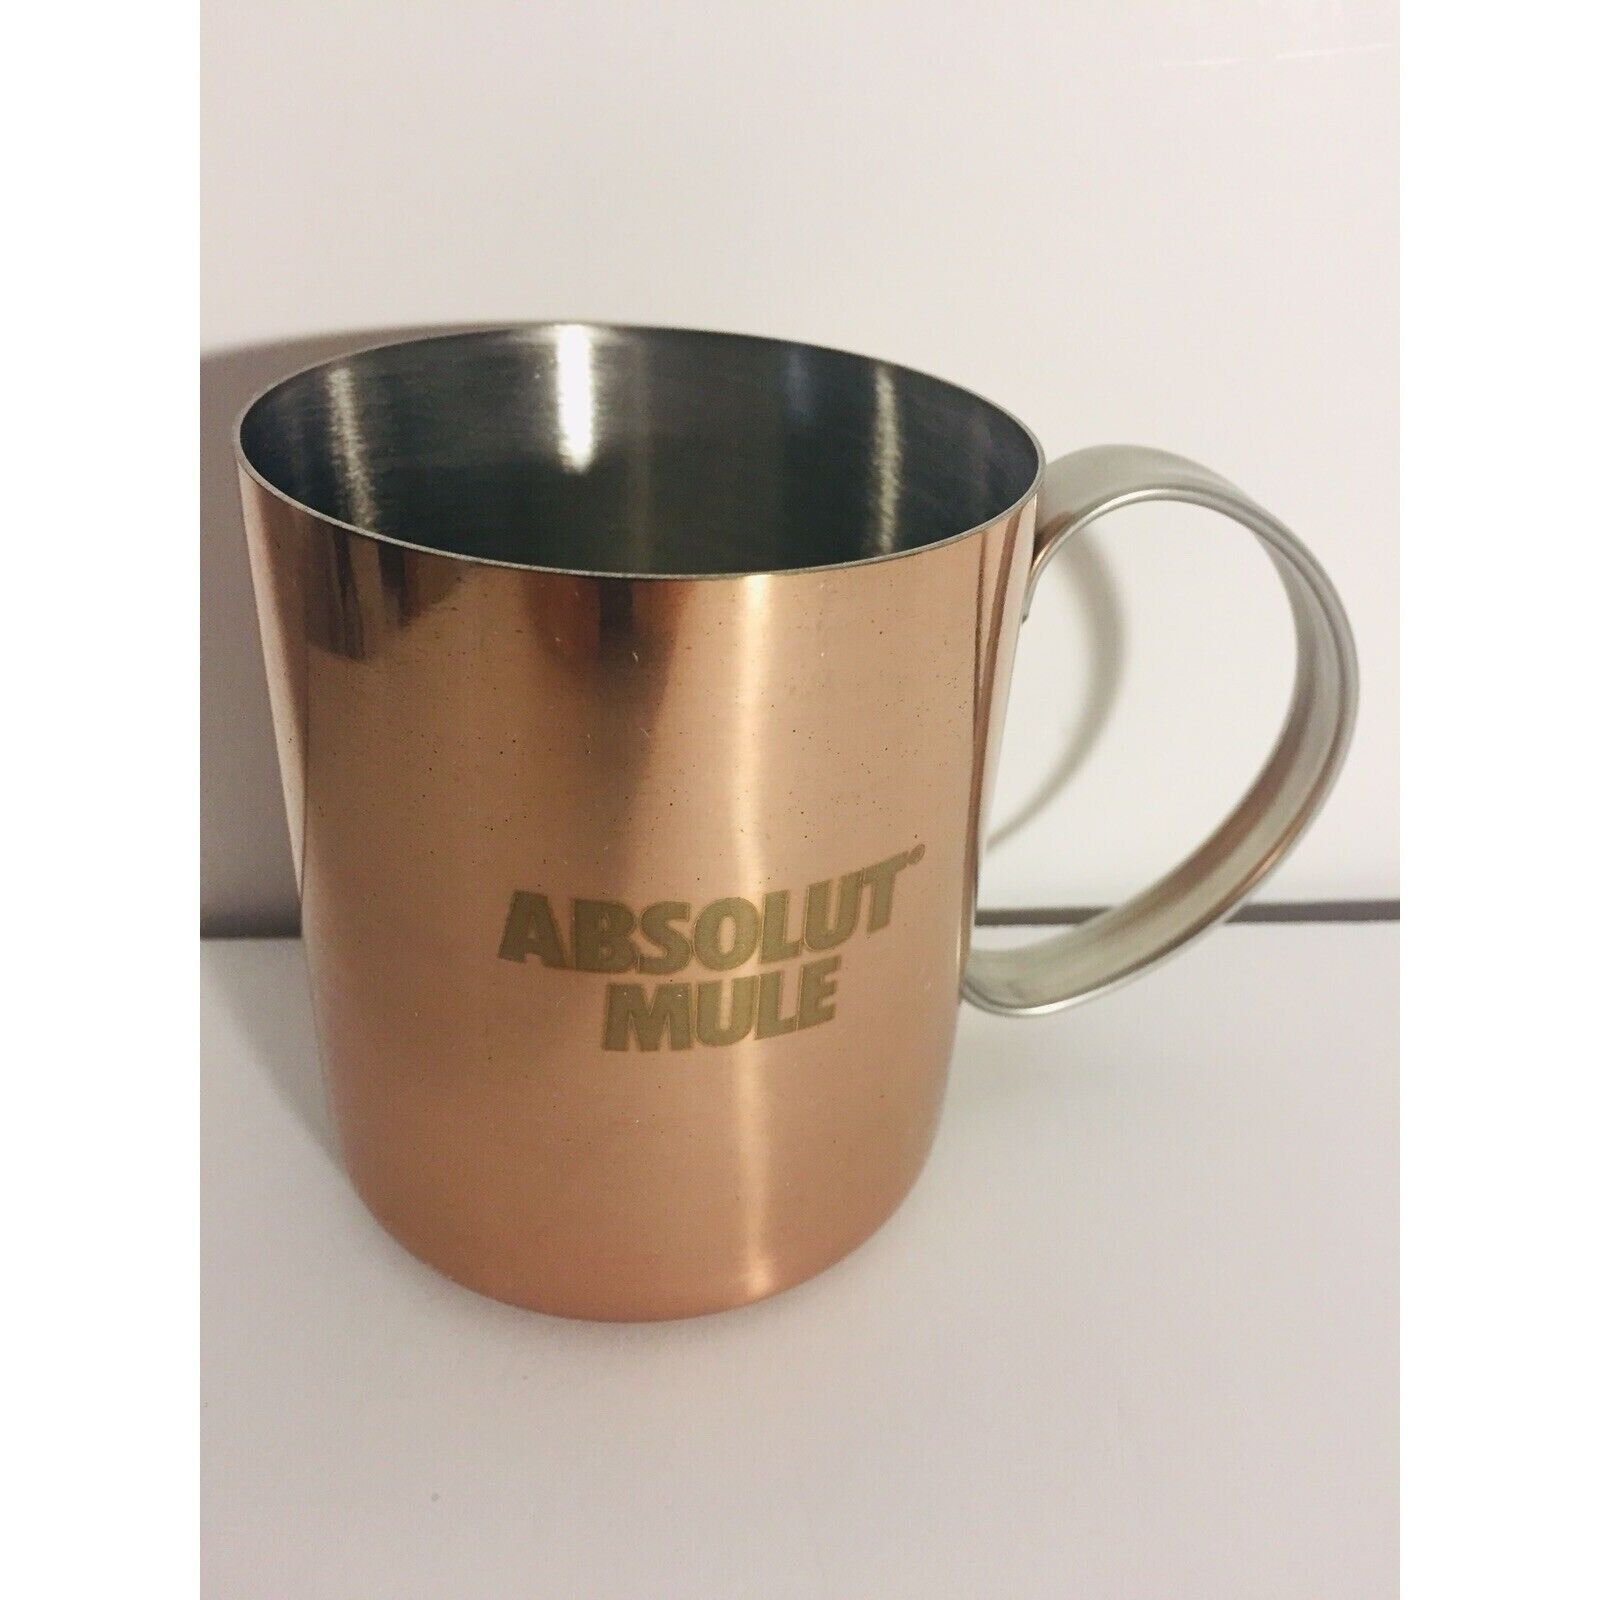 Absolut Mule Vodka Copper Metal Cup Mug Moscow New